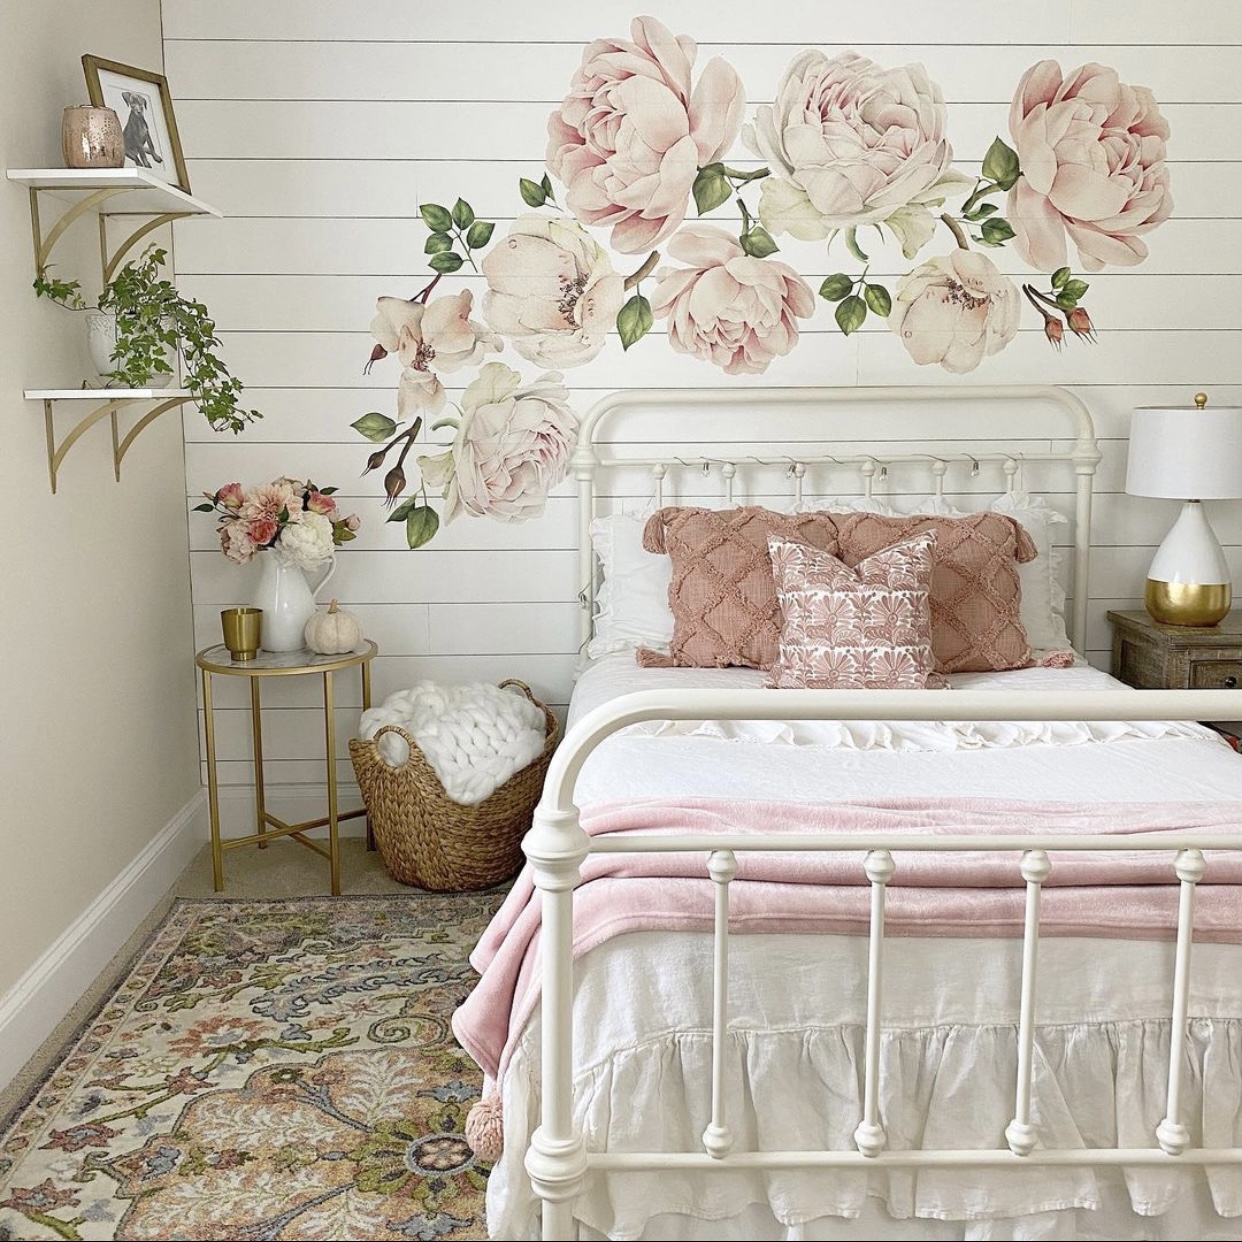 Girls bedroom with a shiplap feature wall and pink flower decals.